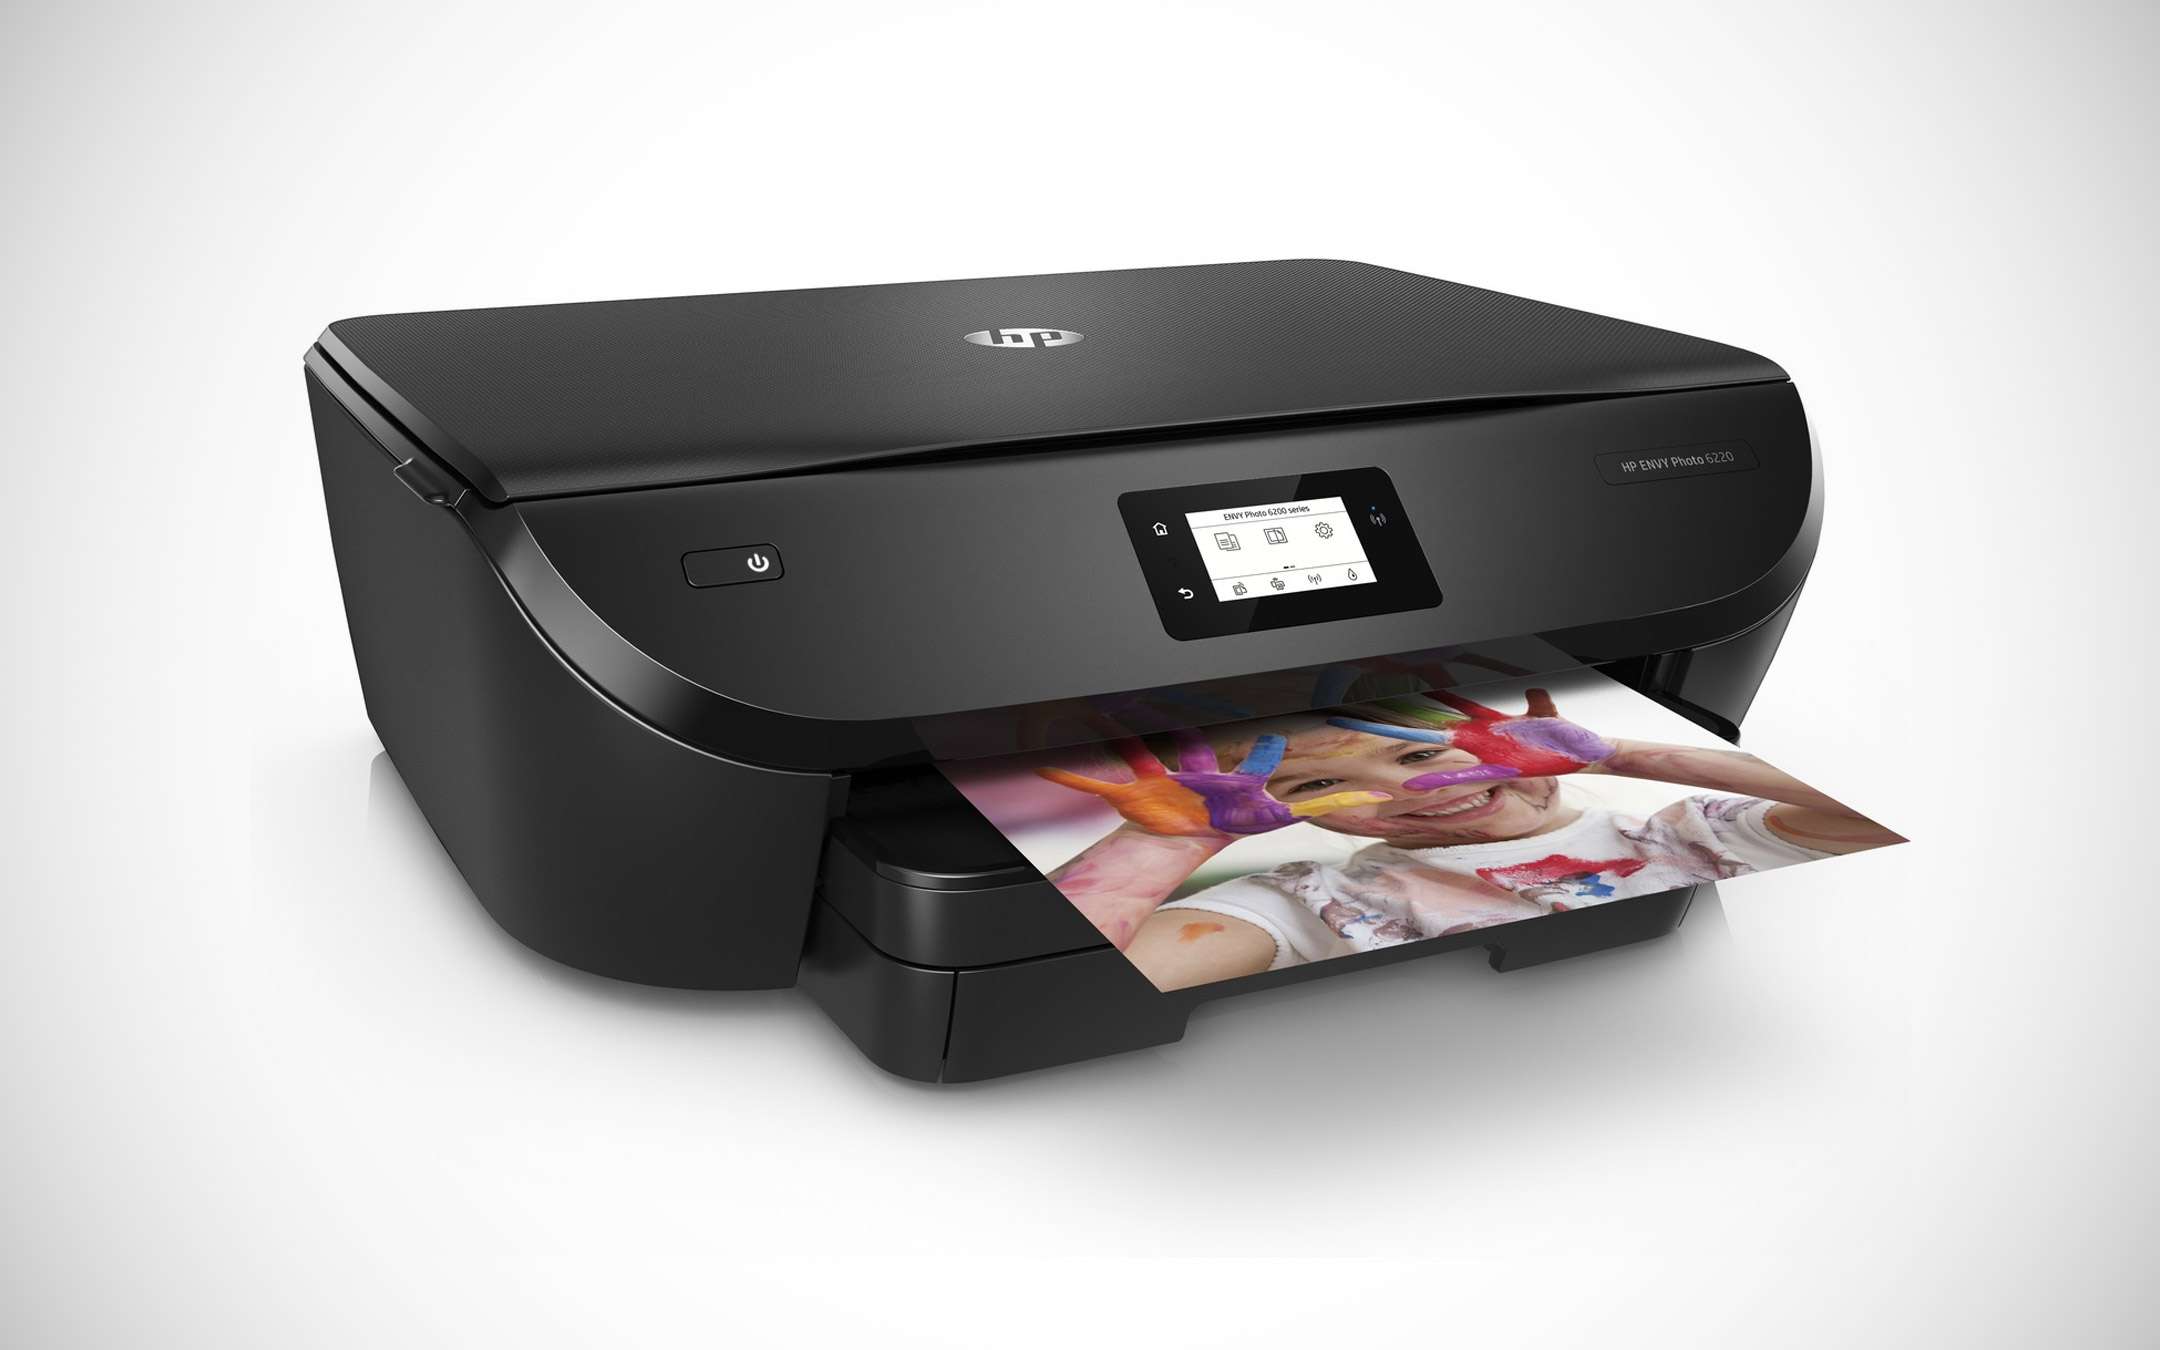 -27% on Amazon for the HP Envy Photo 6220 printer